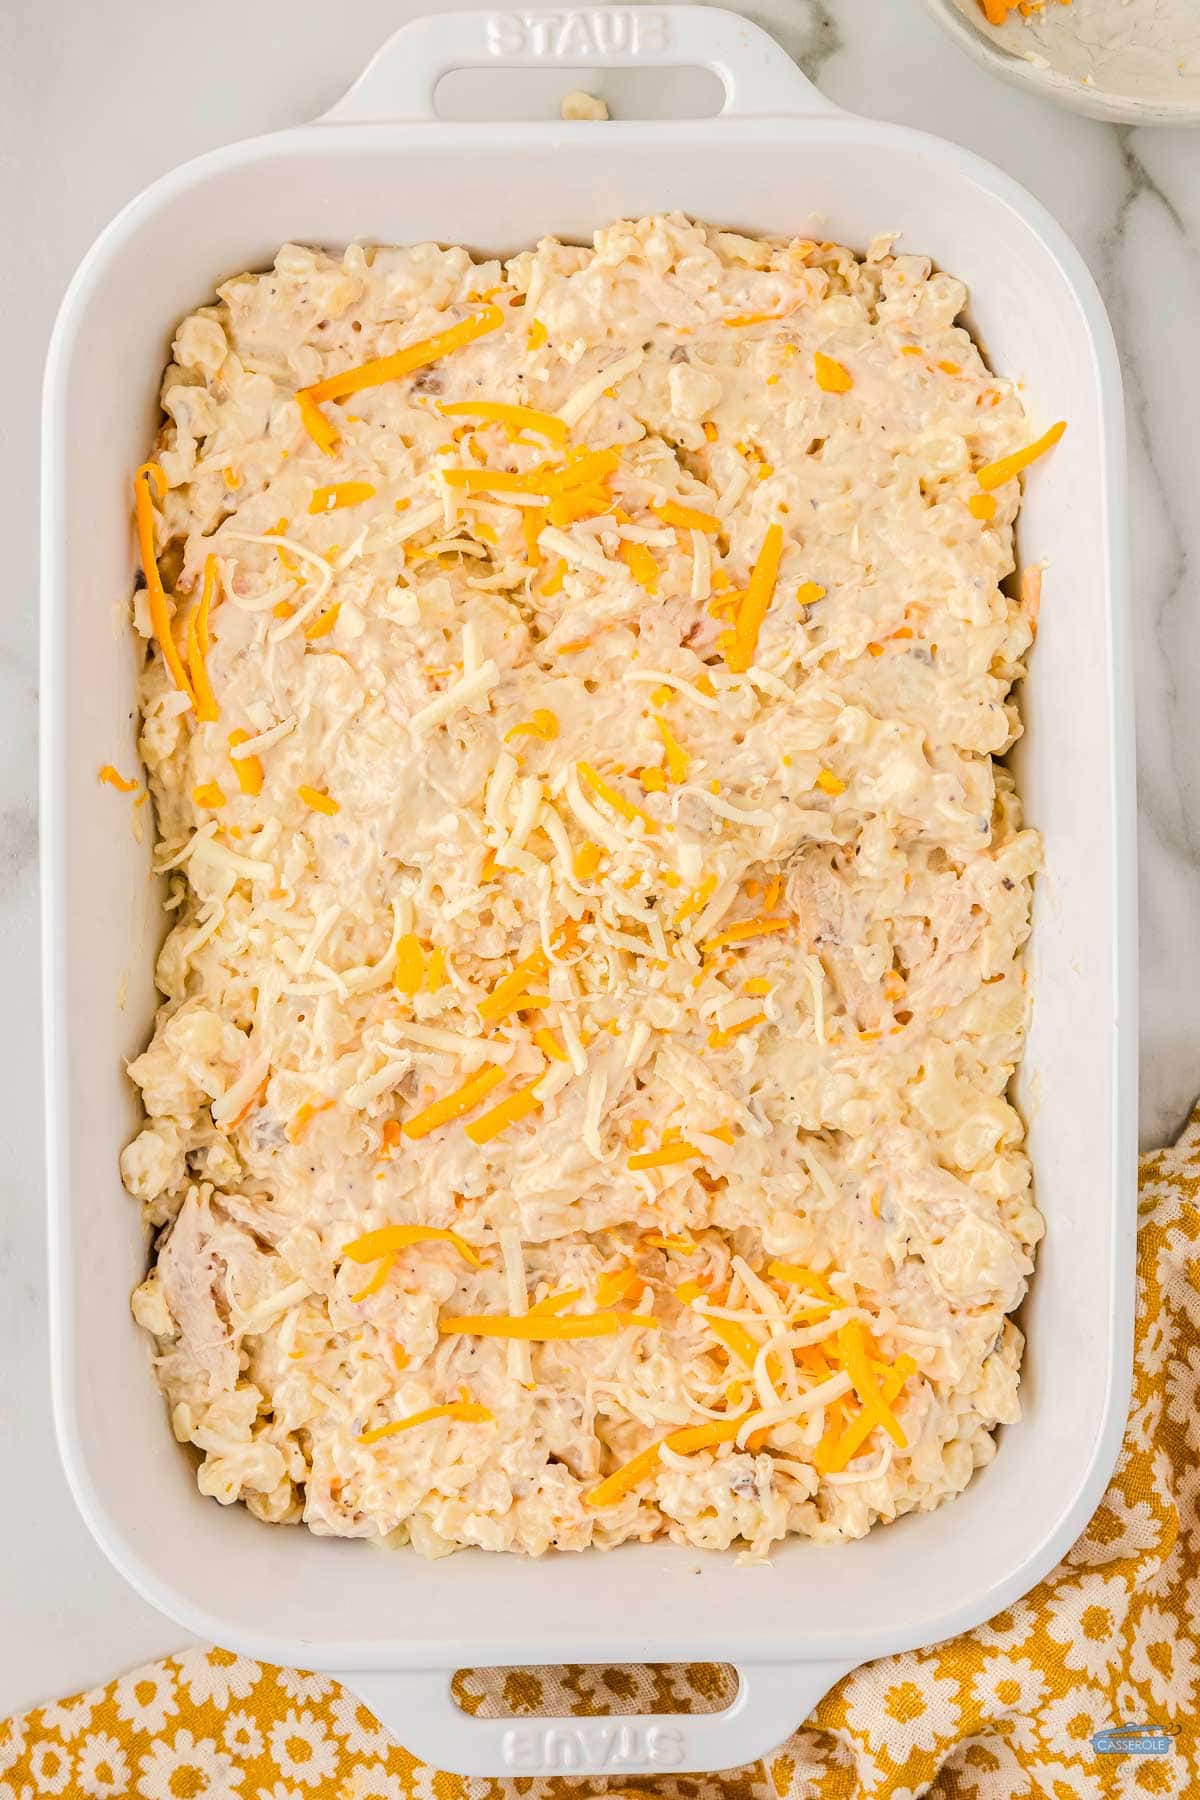 spread into baking dish and top with remaining shredded cheese